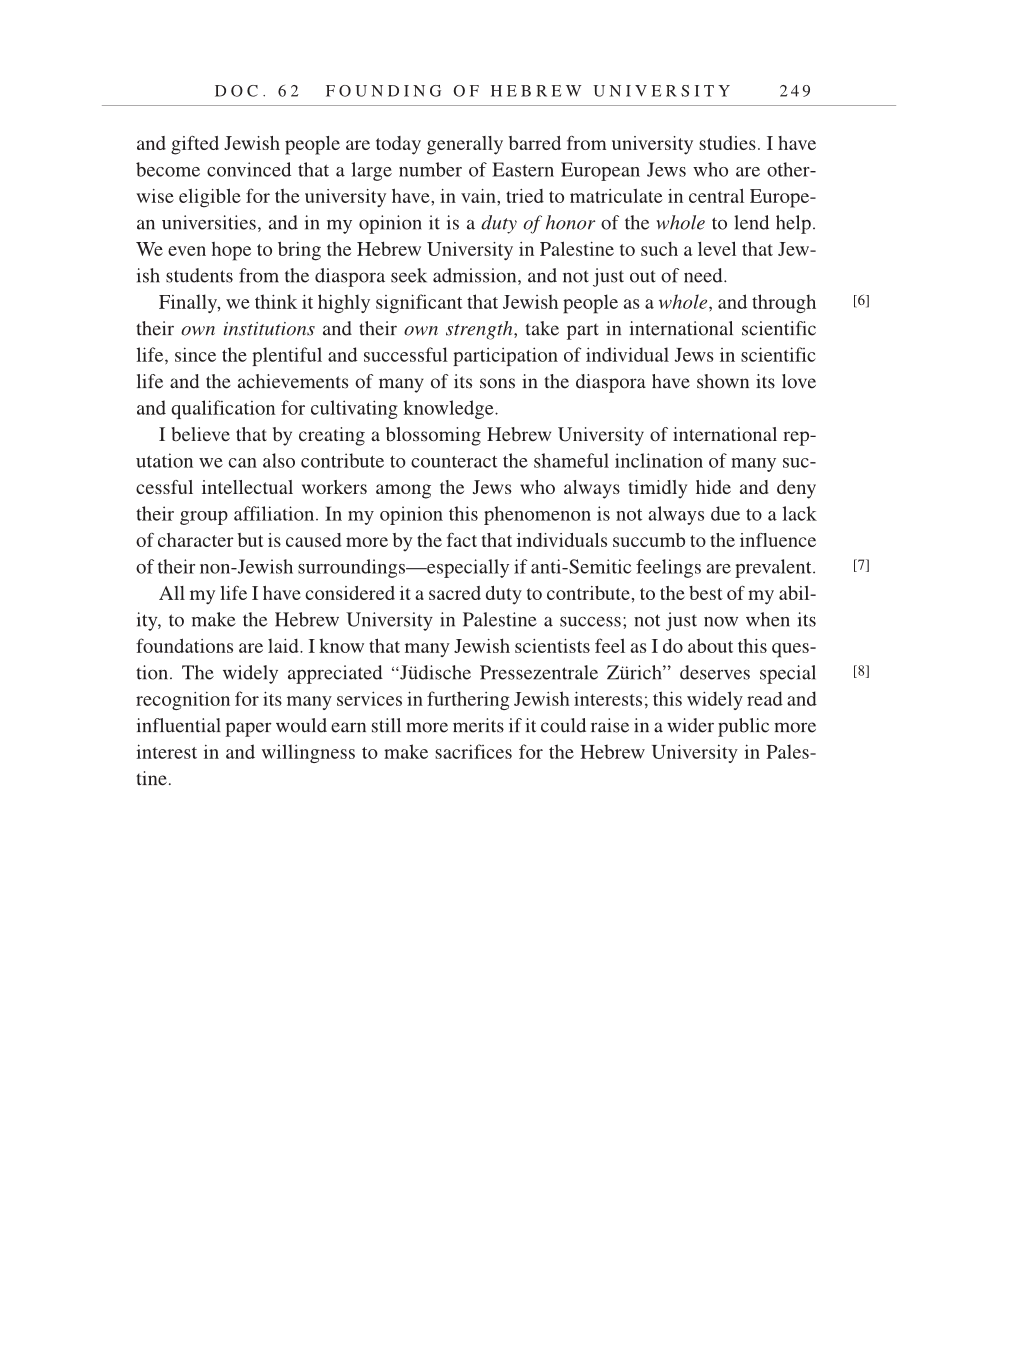 Volume 7: The Berlin Years: Writings, 1918-1921 (English translation supplement) page 249